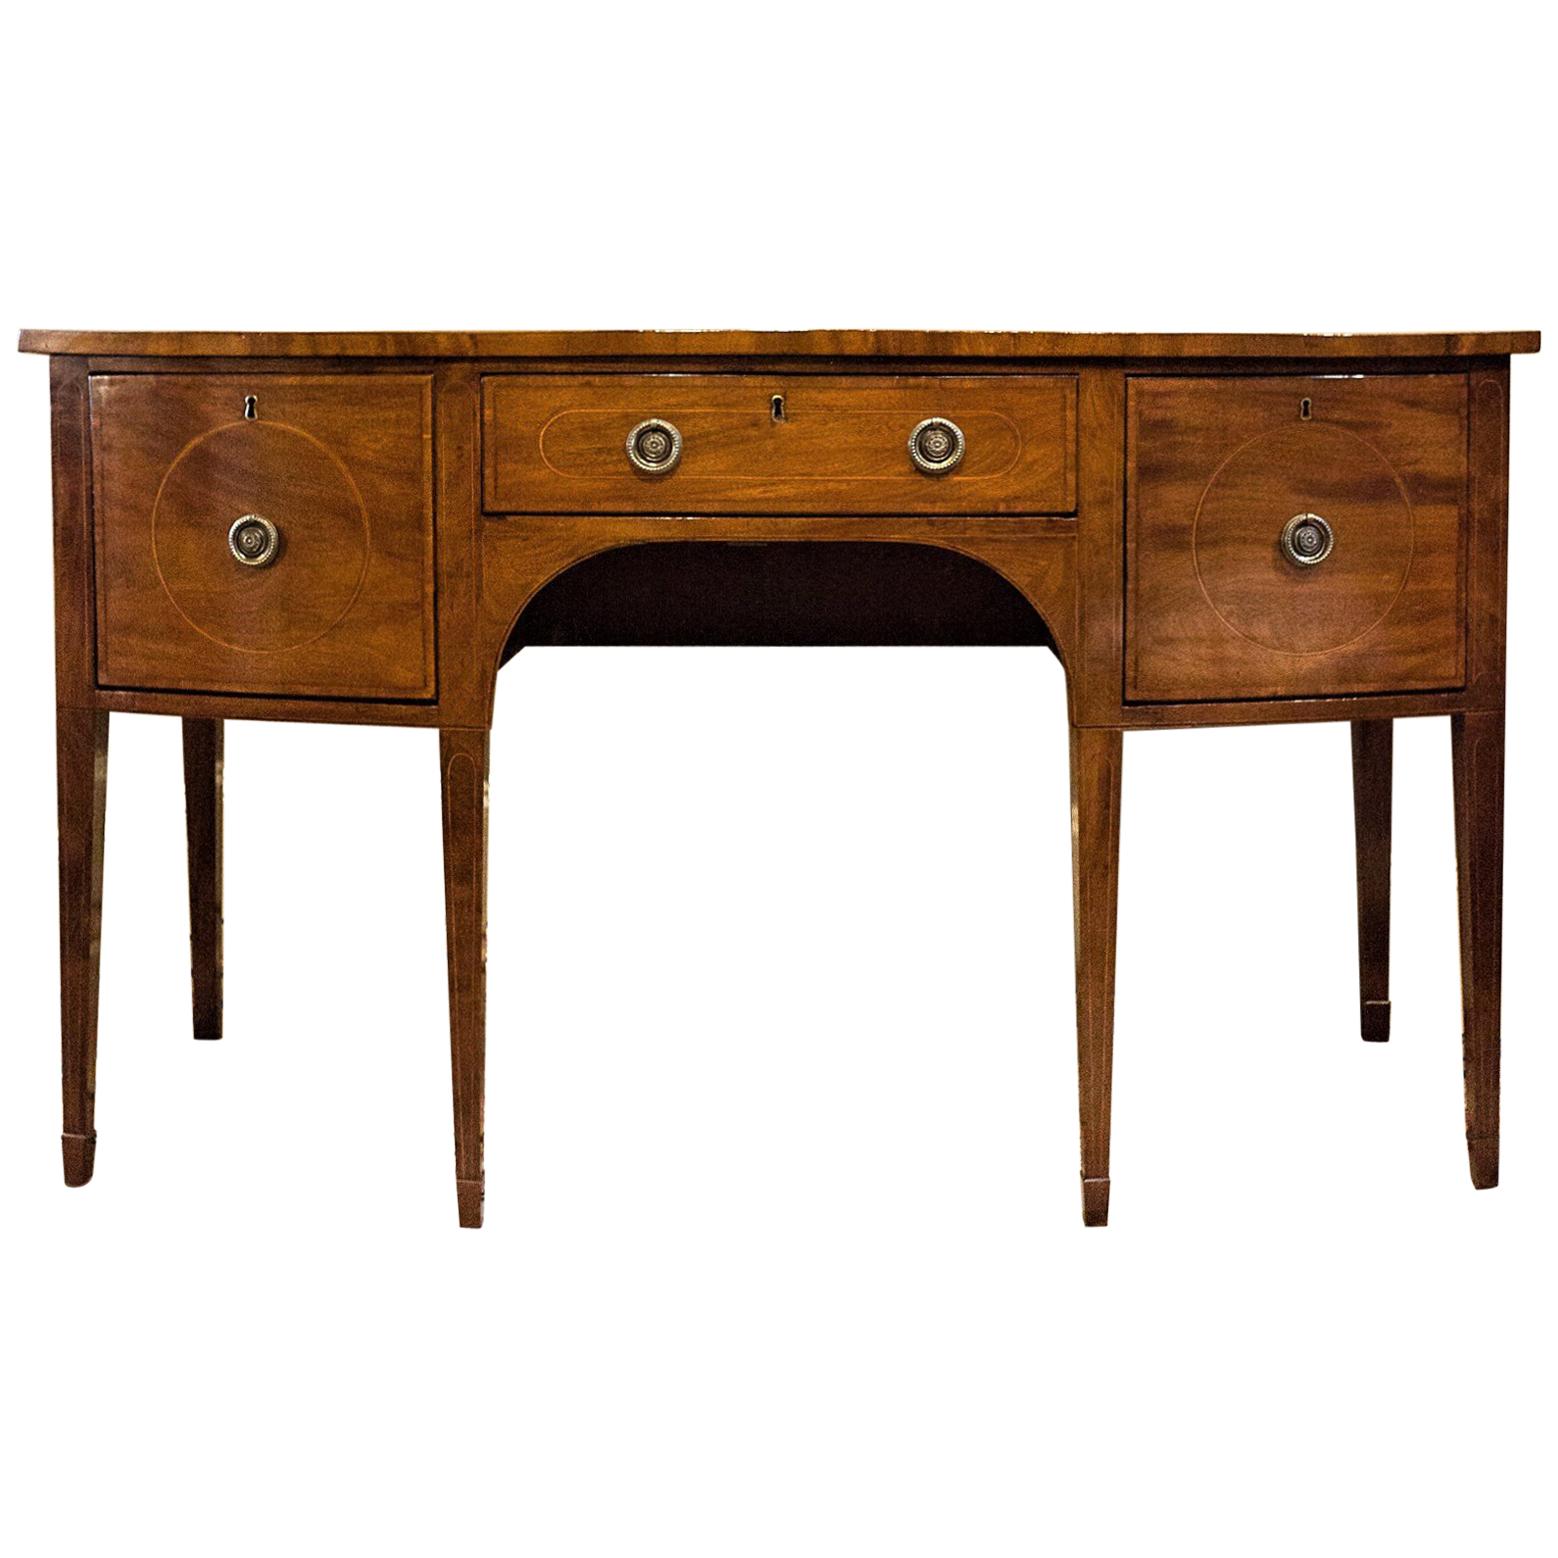 Regency Bow Front Mahogany Sideboard with Satinwood and Ebony Inlay, circa 1800 For Sale